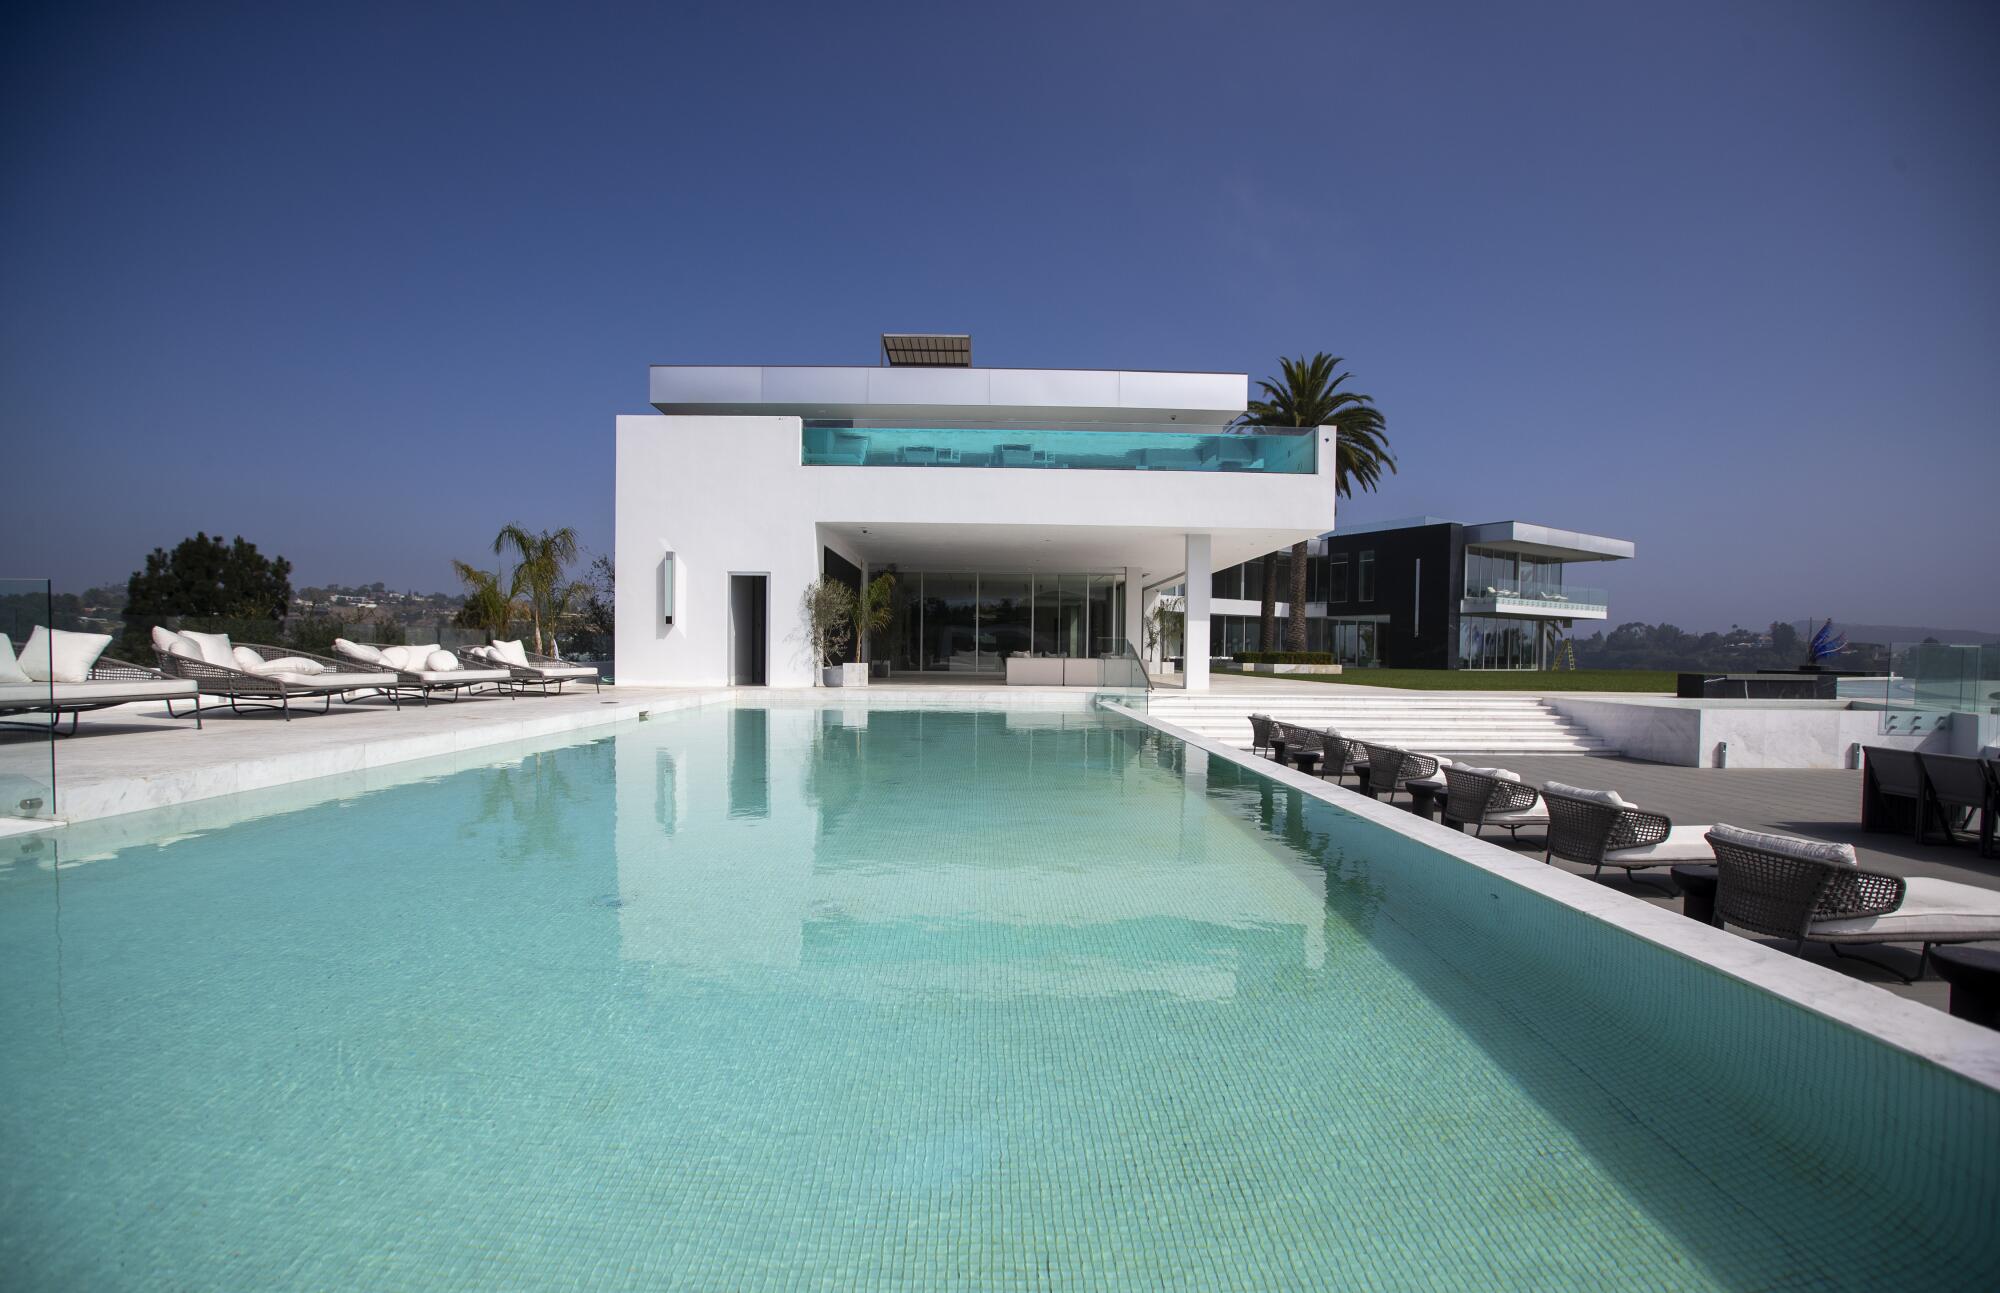 A view of a pool with a 4,000-square-foot bedroom above it at The One.